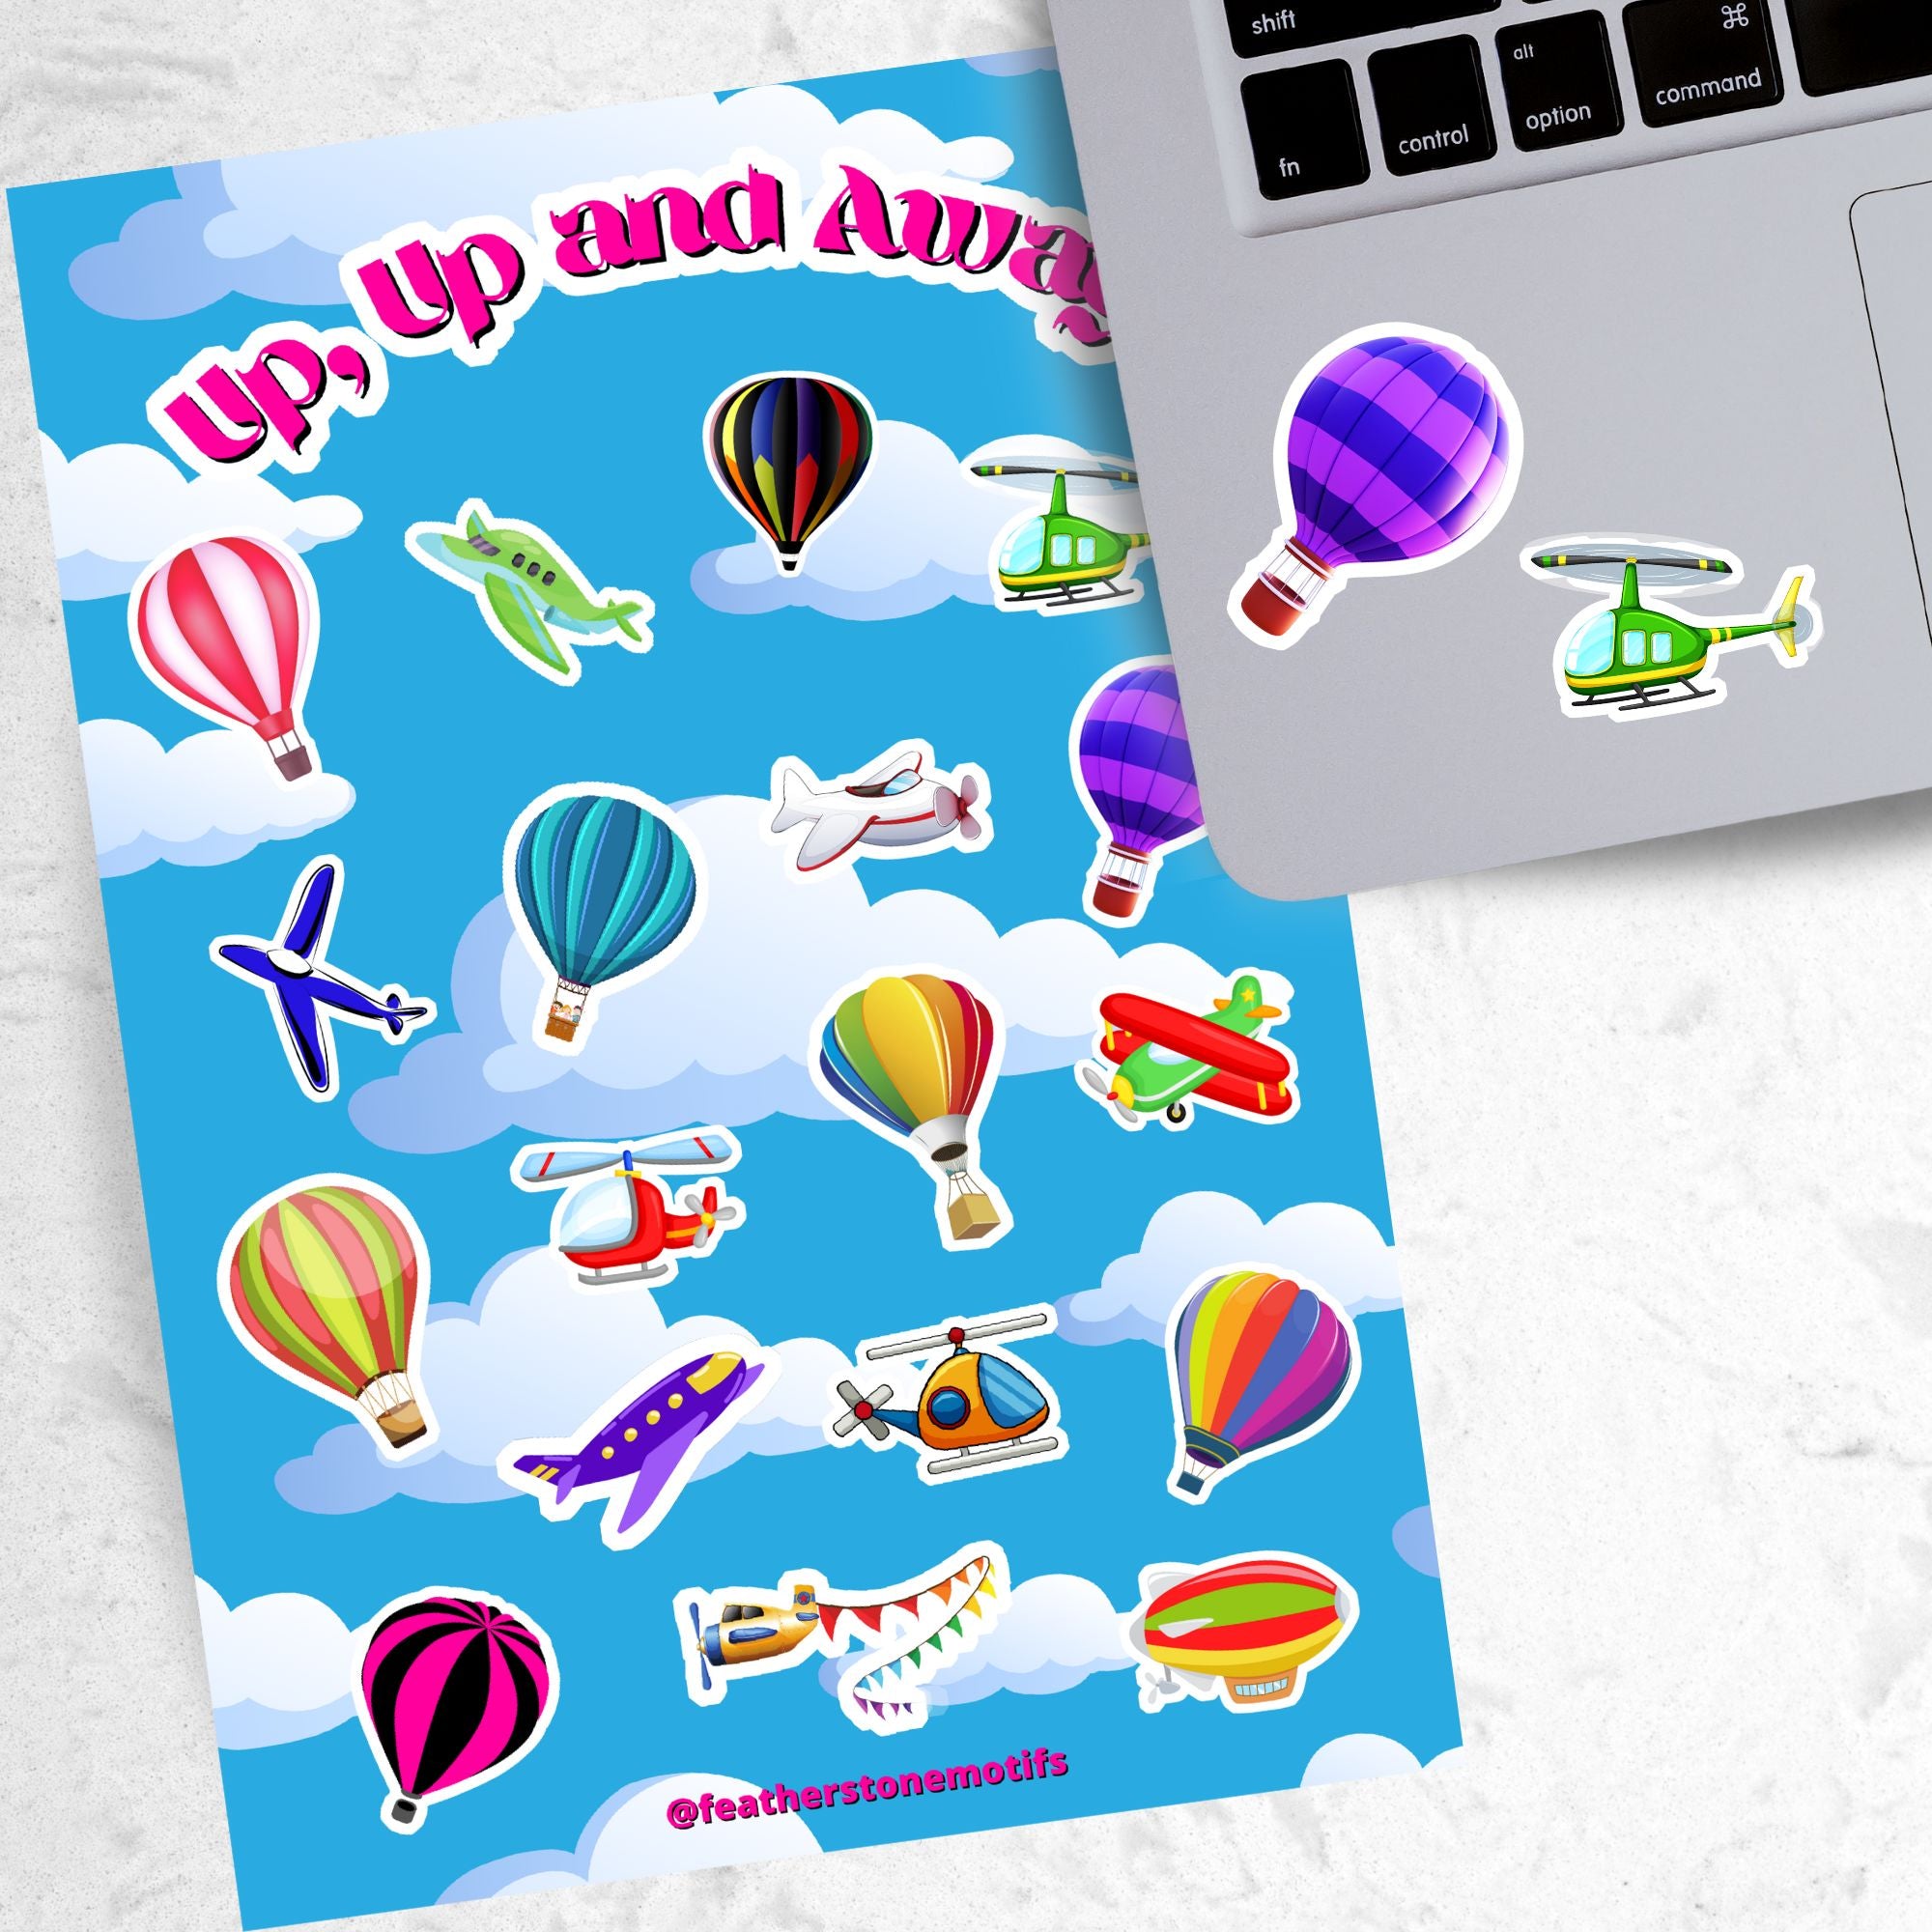 Fly away in a hot air balloon, a plane, or a helicopter with this sticker sheet. This image show the sticker sheet next to an open laptop with stickers of a purple hot air balloon, and a green helicopter, applied below the keyboard.